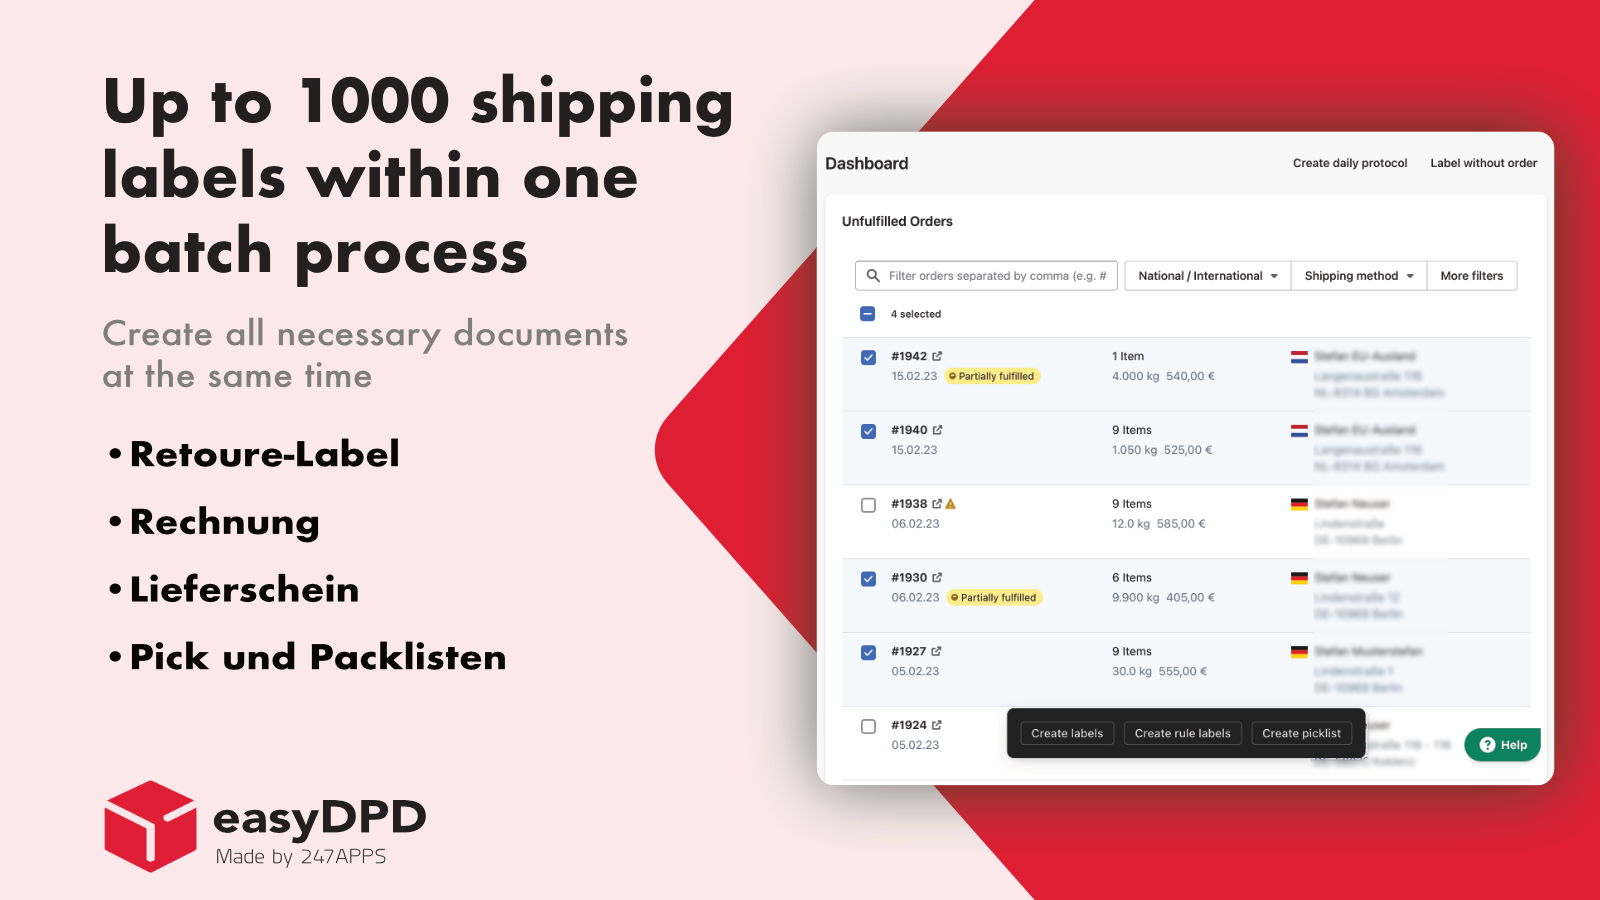 Up to 1000 shipping labels within one batch process